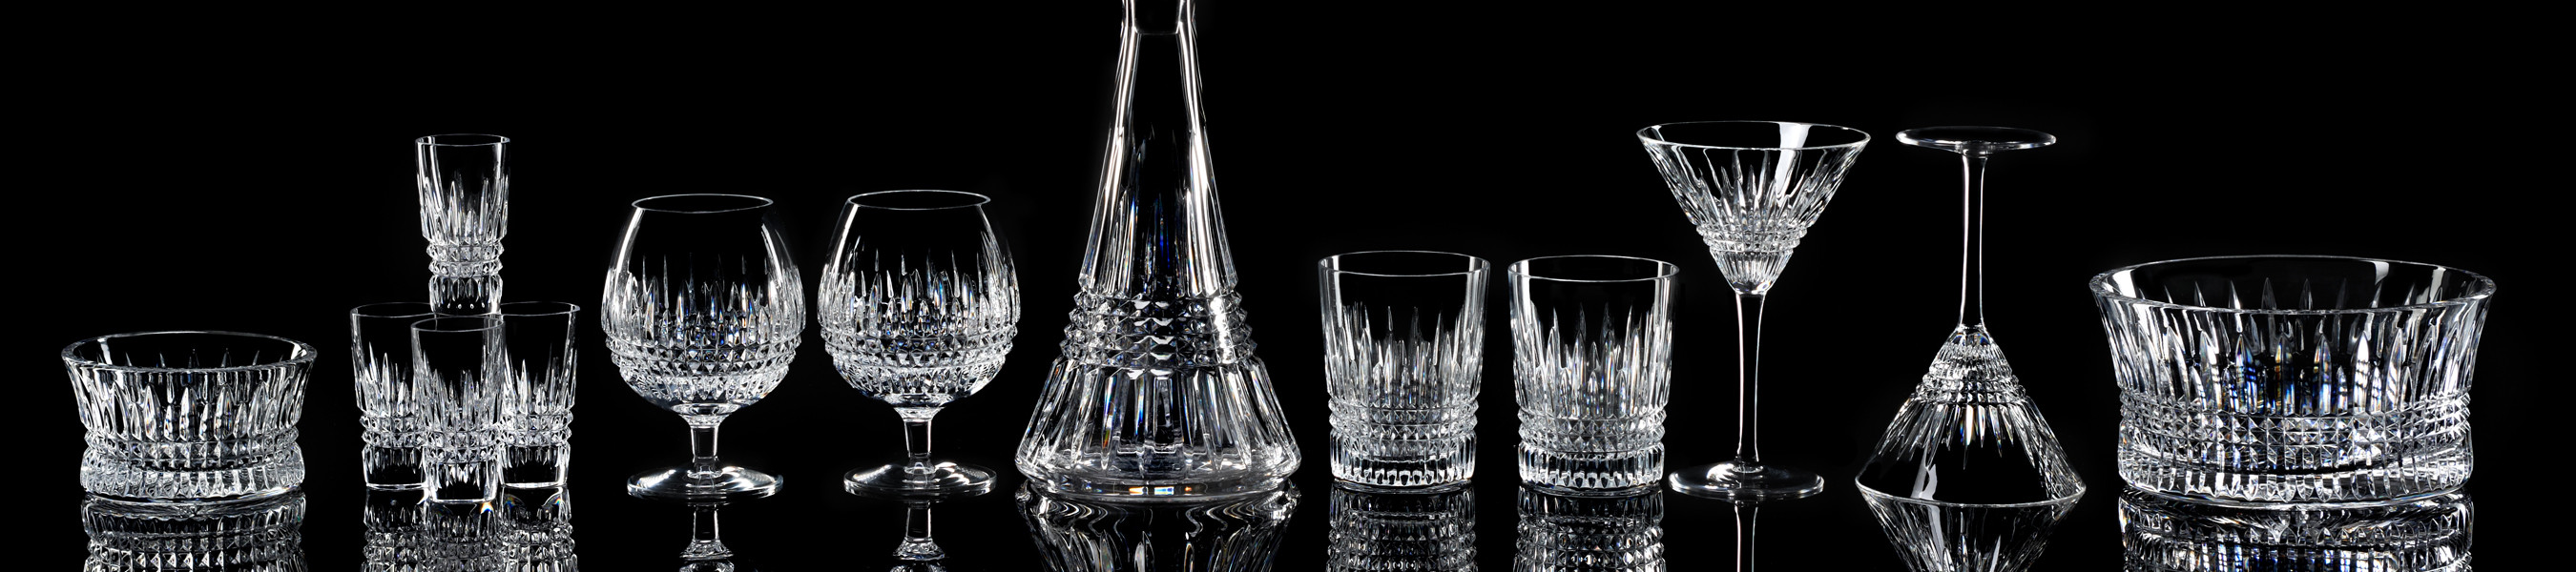 11 Lovable Marquis by Waterford Sheridan Flared 11 Crystal Vase 2024 free download marquis by waterford sheridan flared 11 crystal vase of waterford lismore diamond collection waterforda us regarding waterford lismore diamond collection